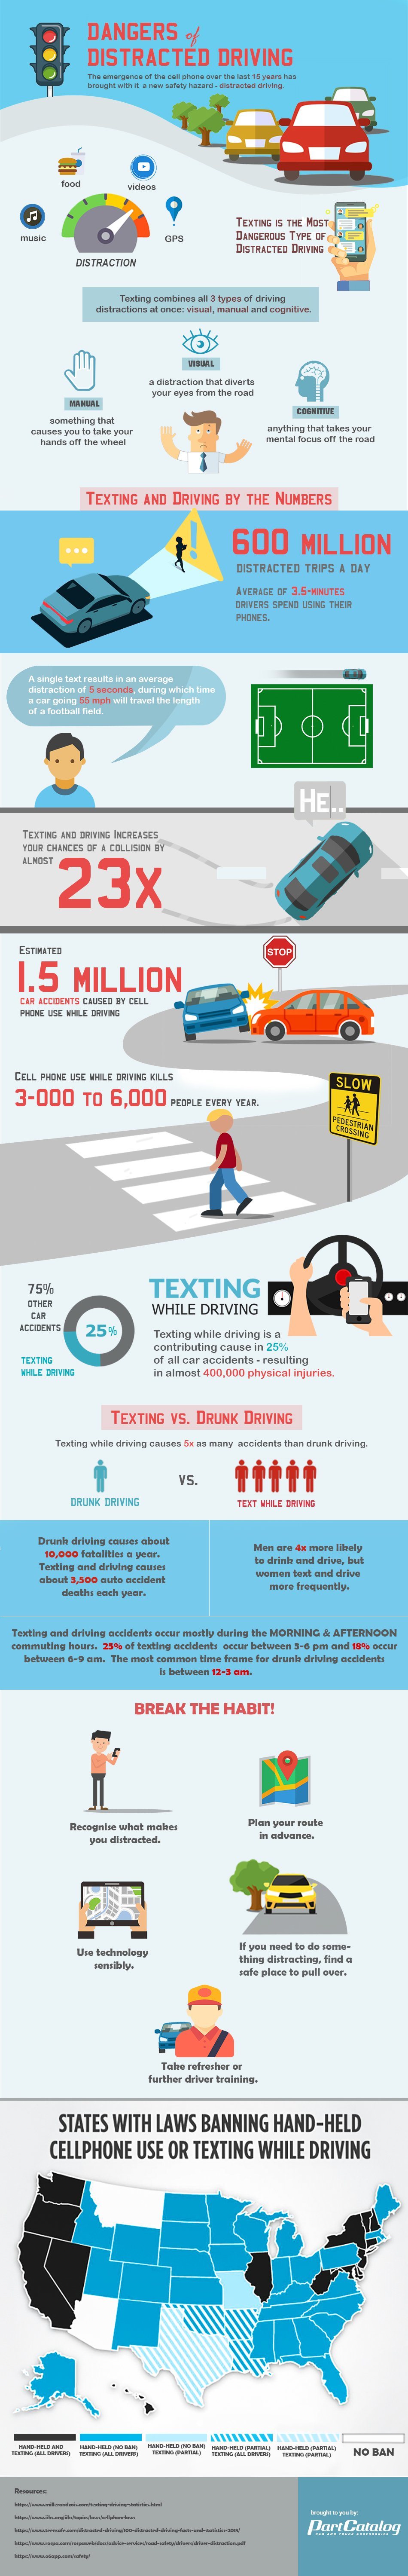 Dangers of Distracted Driving Infographic